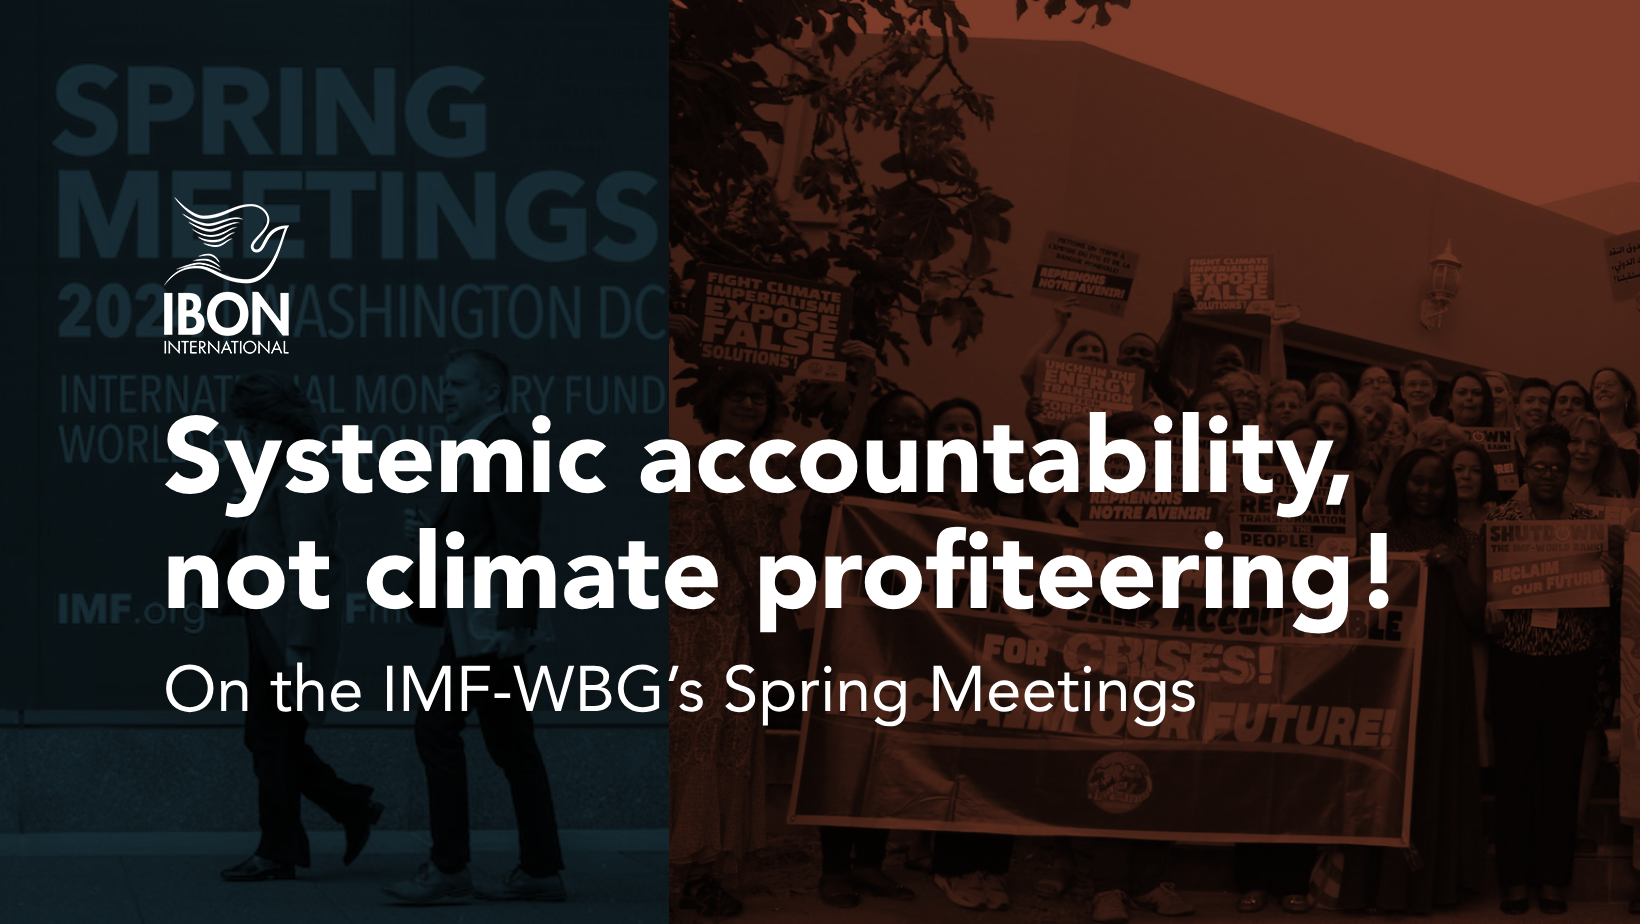 You are currently viewing On the IMF-WBG’s Spring Meetings: Systemic accountability, not climate profiteering